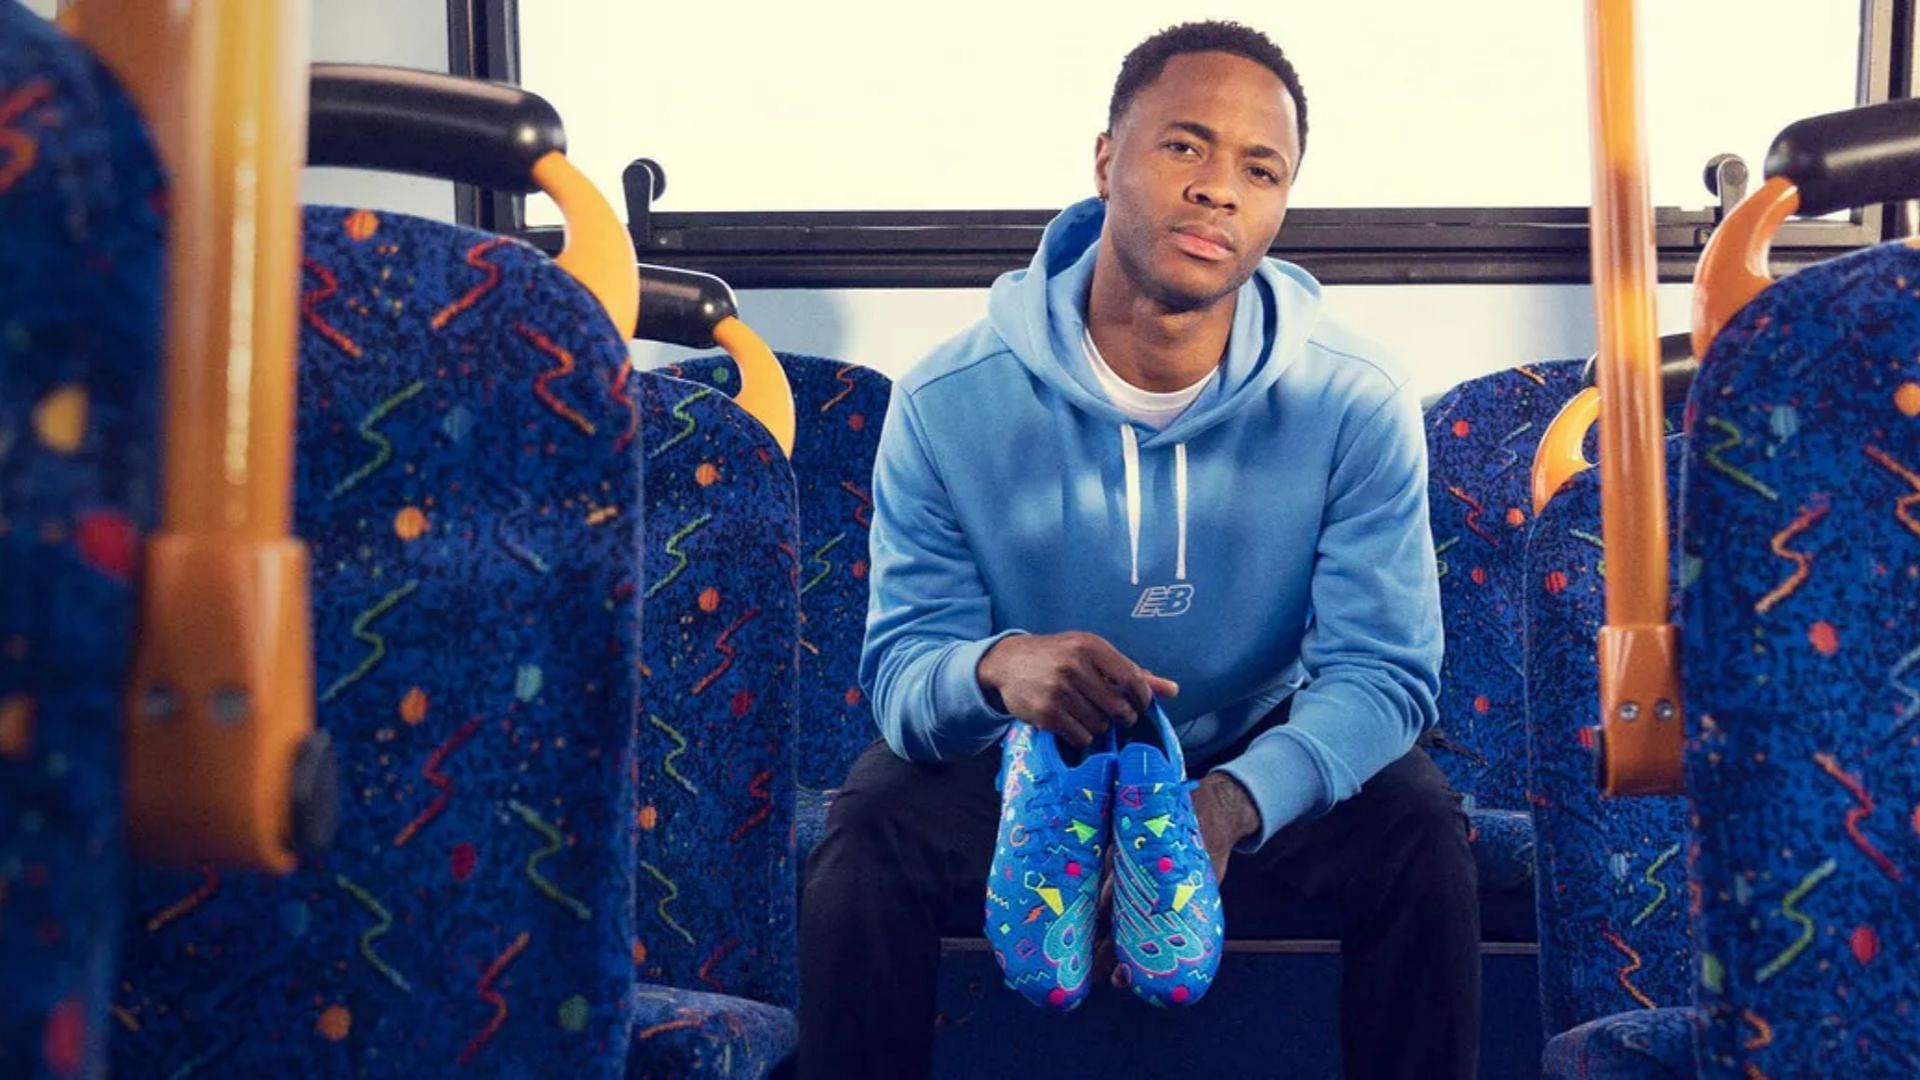 Where to buy New Balance x Raheem Sterling boots? Price, release